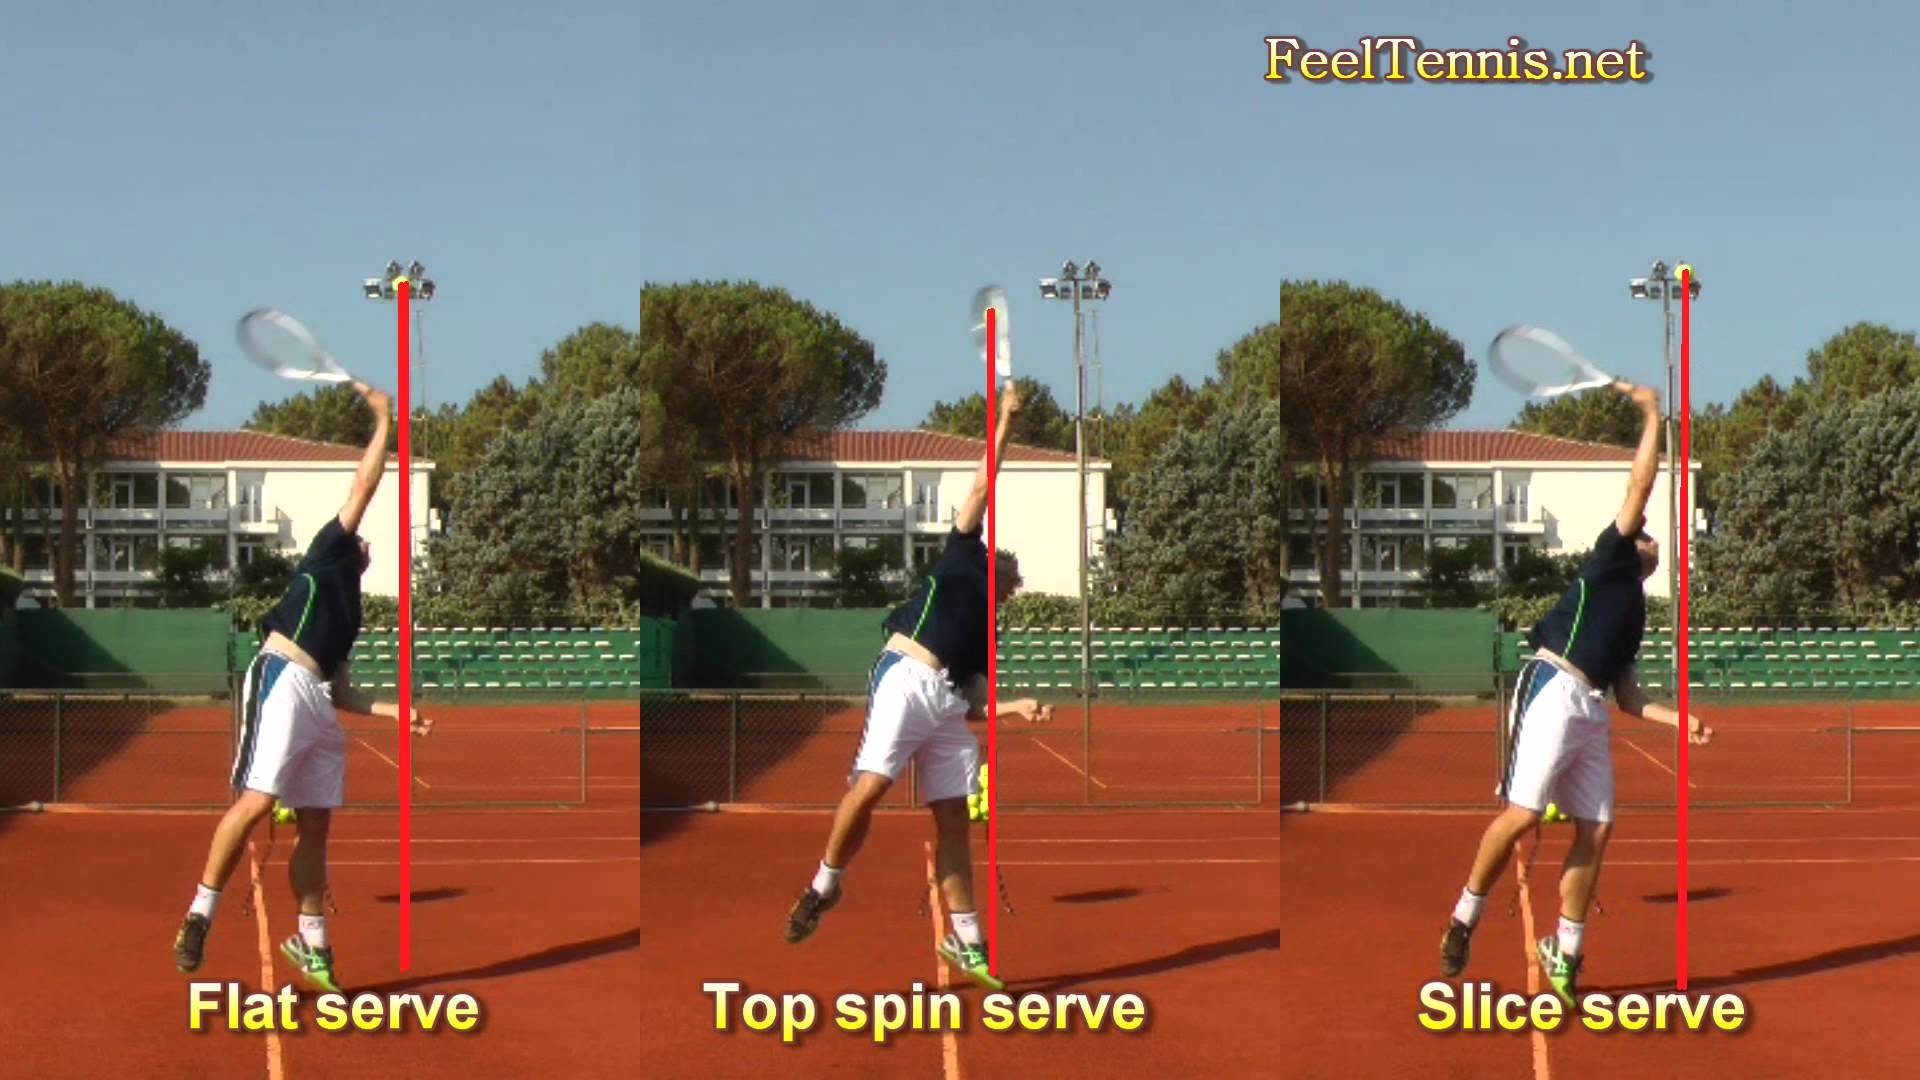 Tennis Serve Toss For Flat, Slice And Top Spin Serves - YouTube